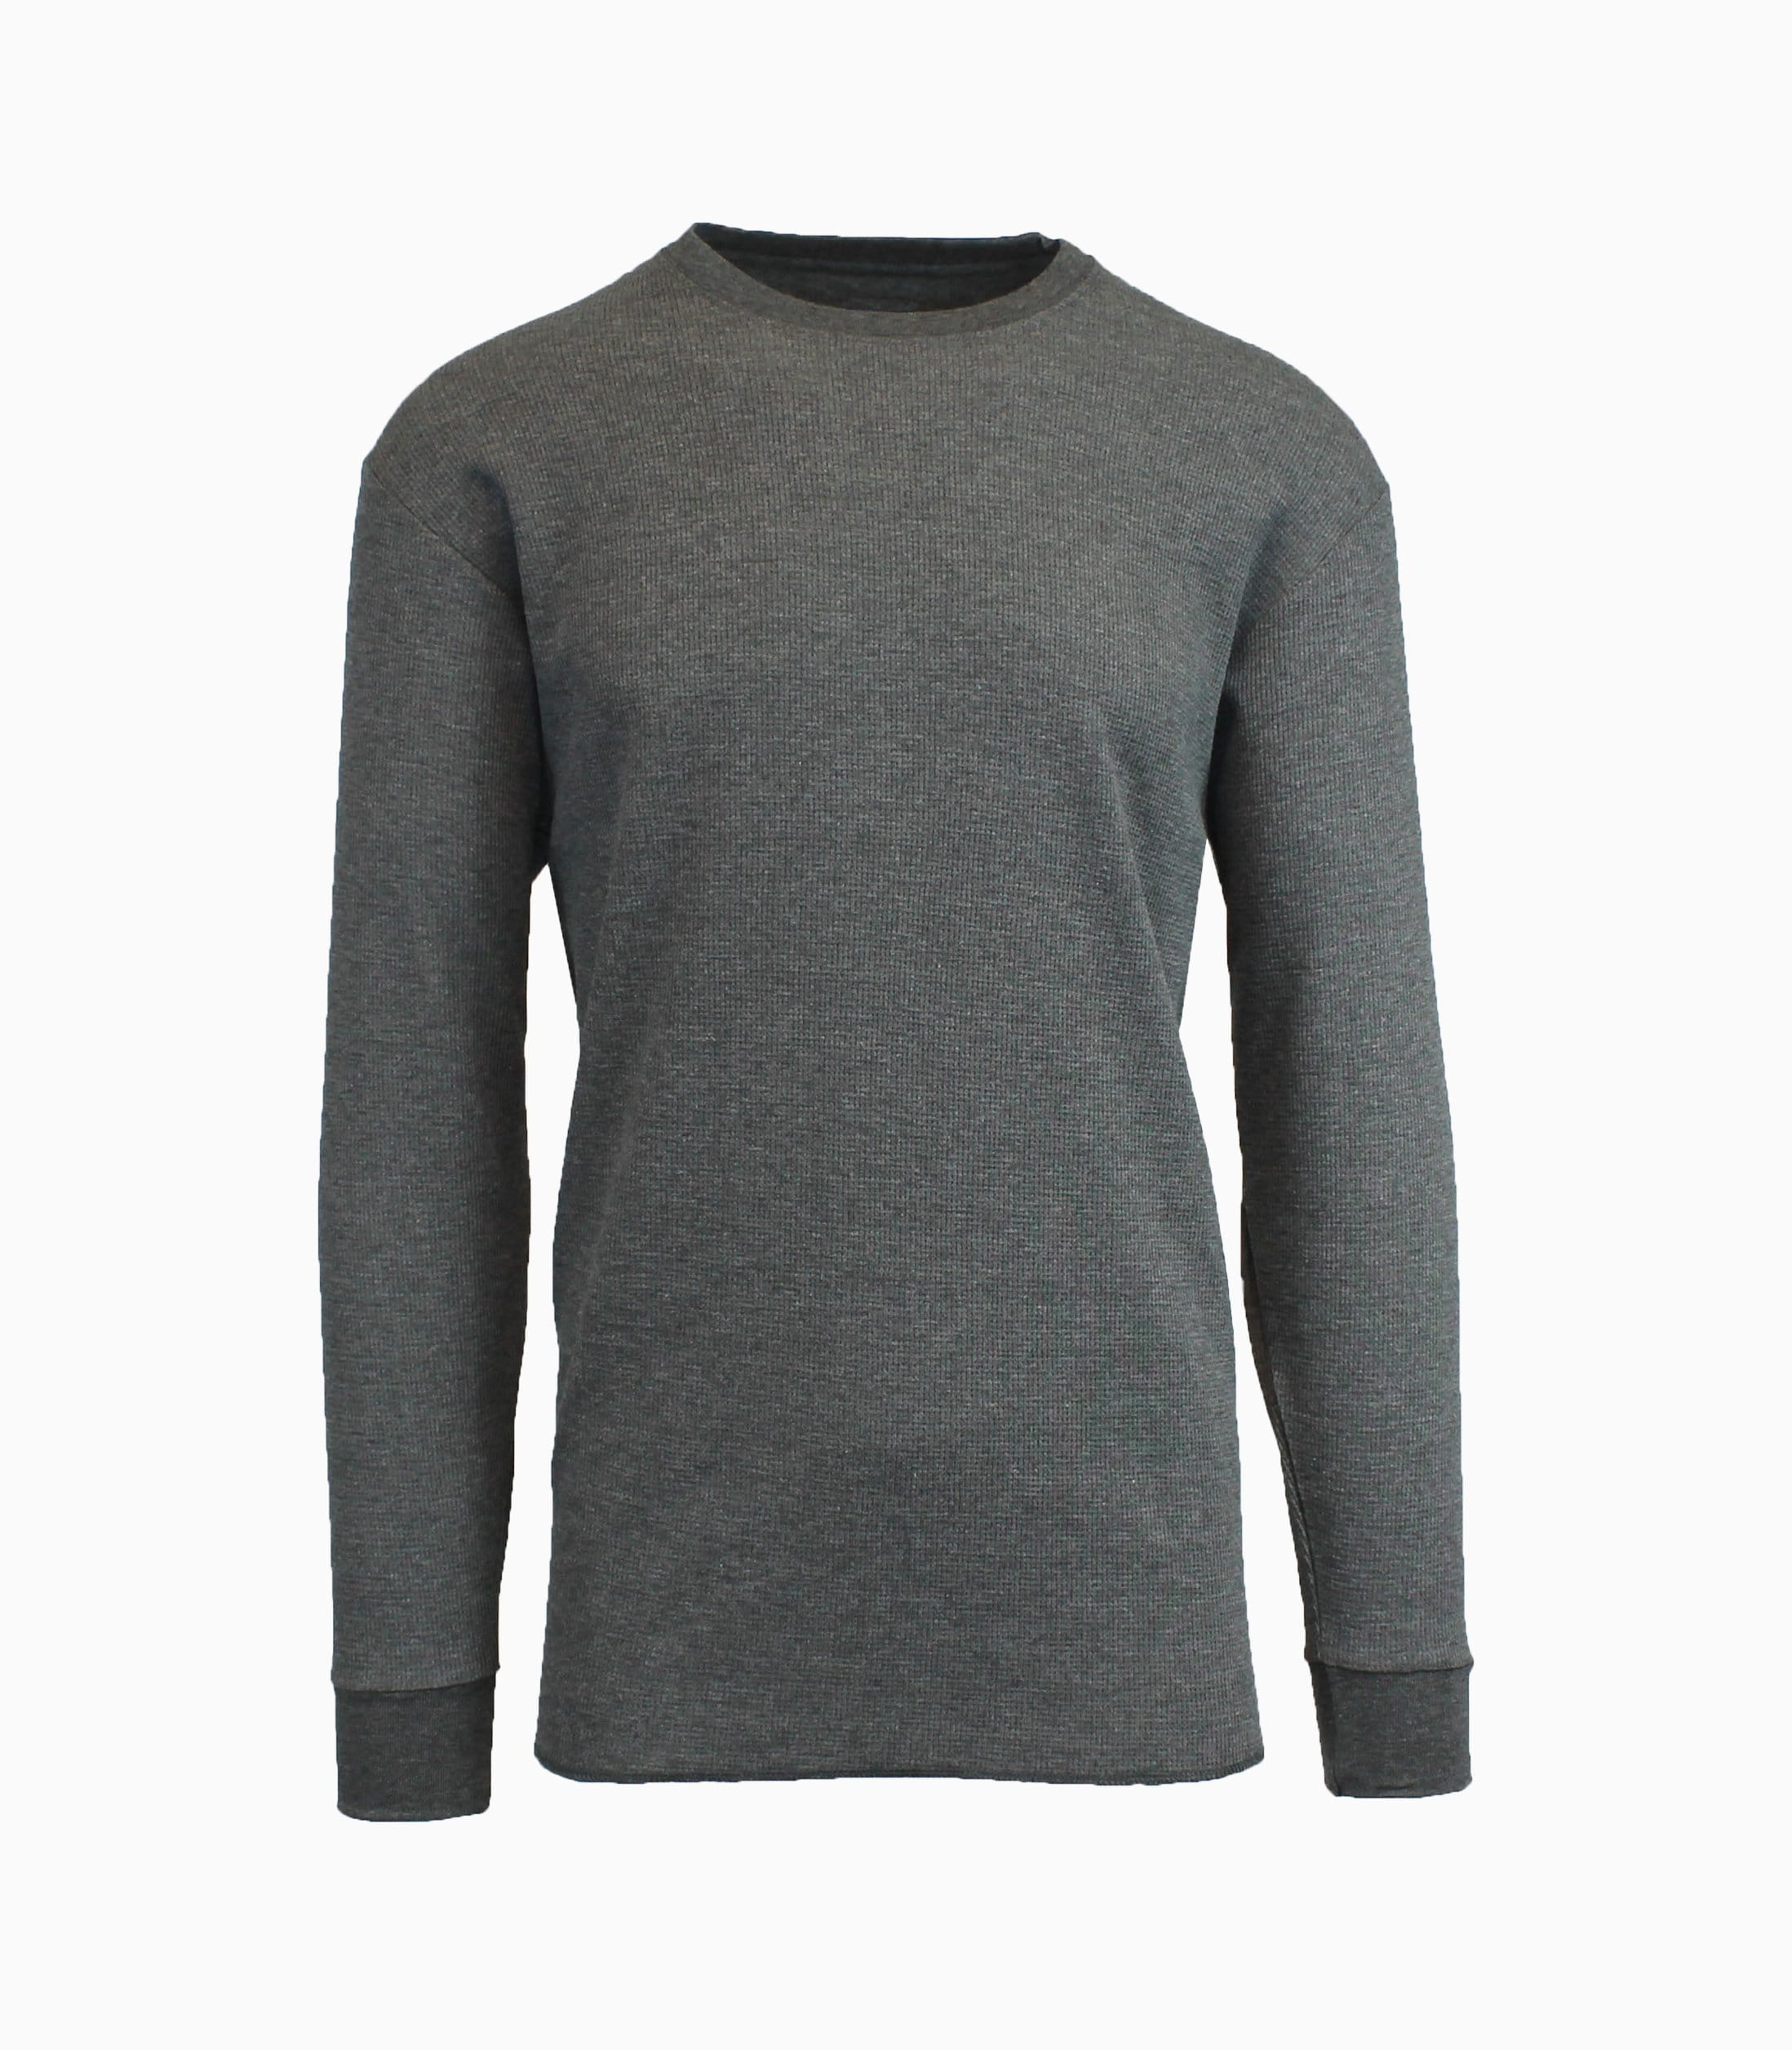 Men's Thermal Crew Neck Shirt – GalaxybyHarvic